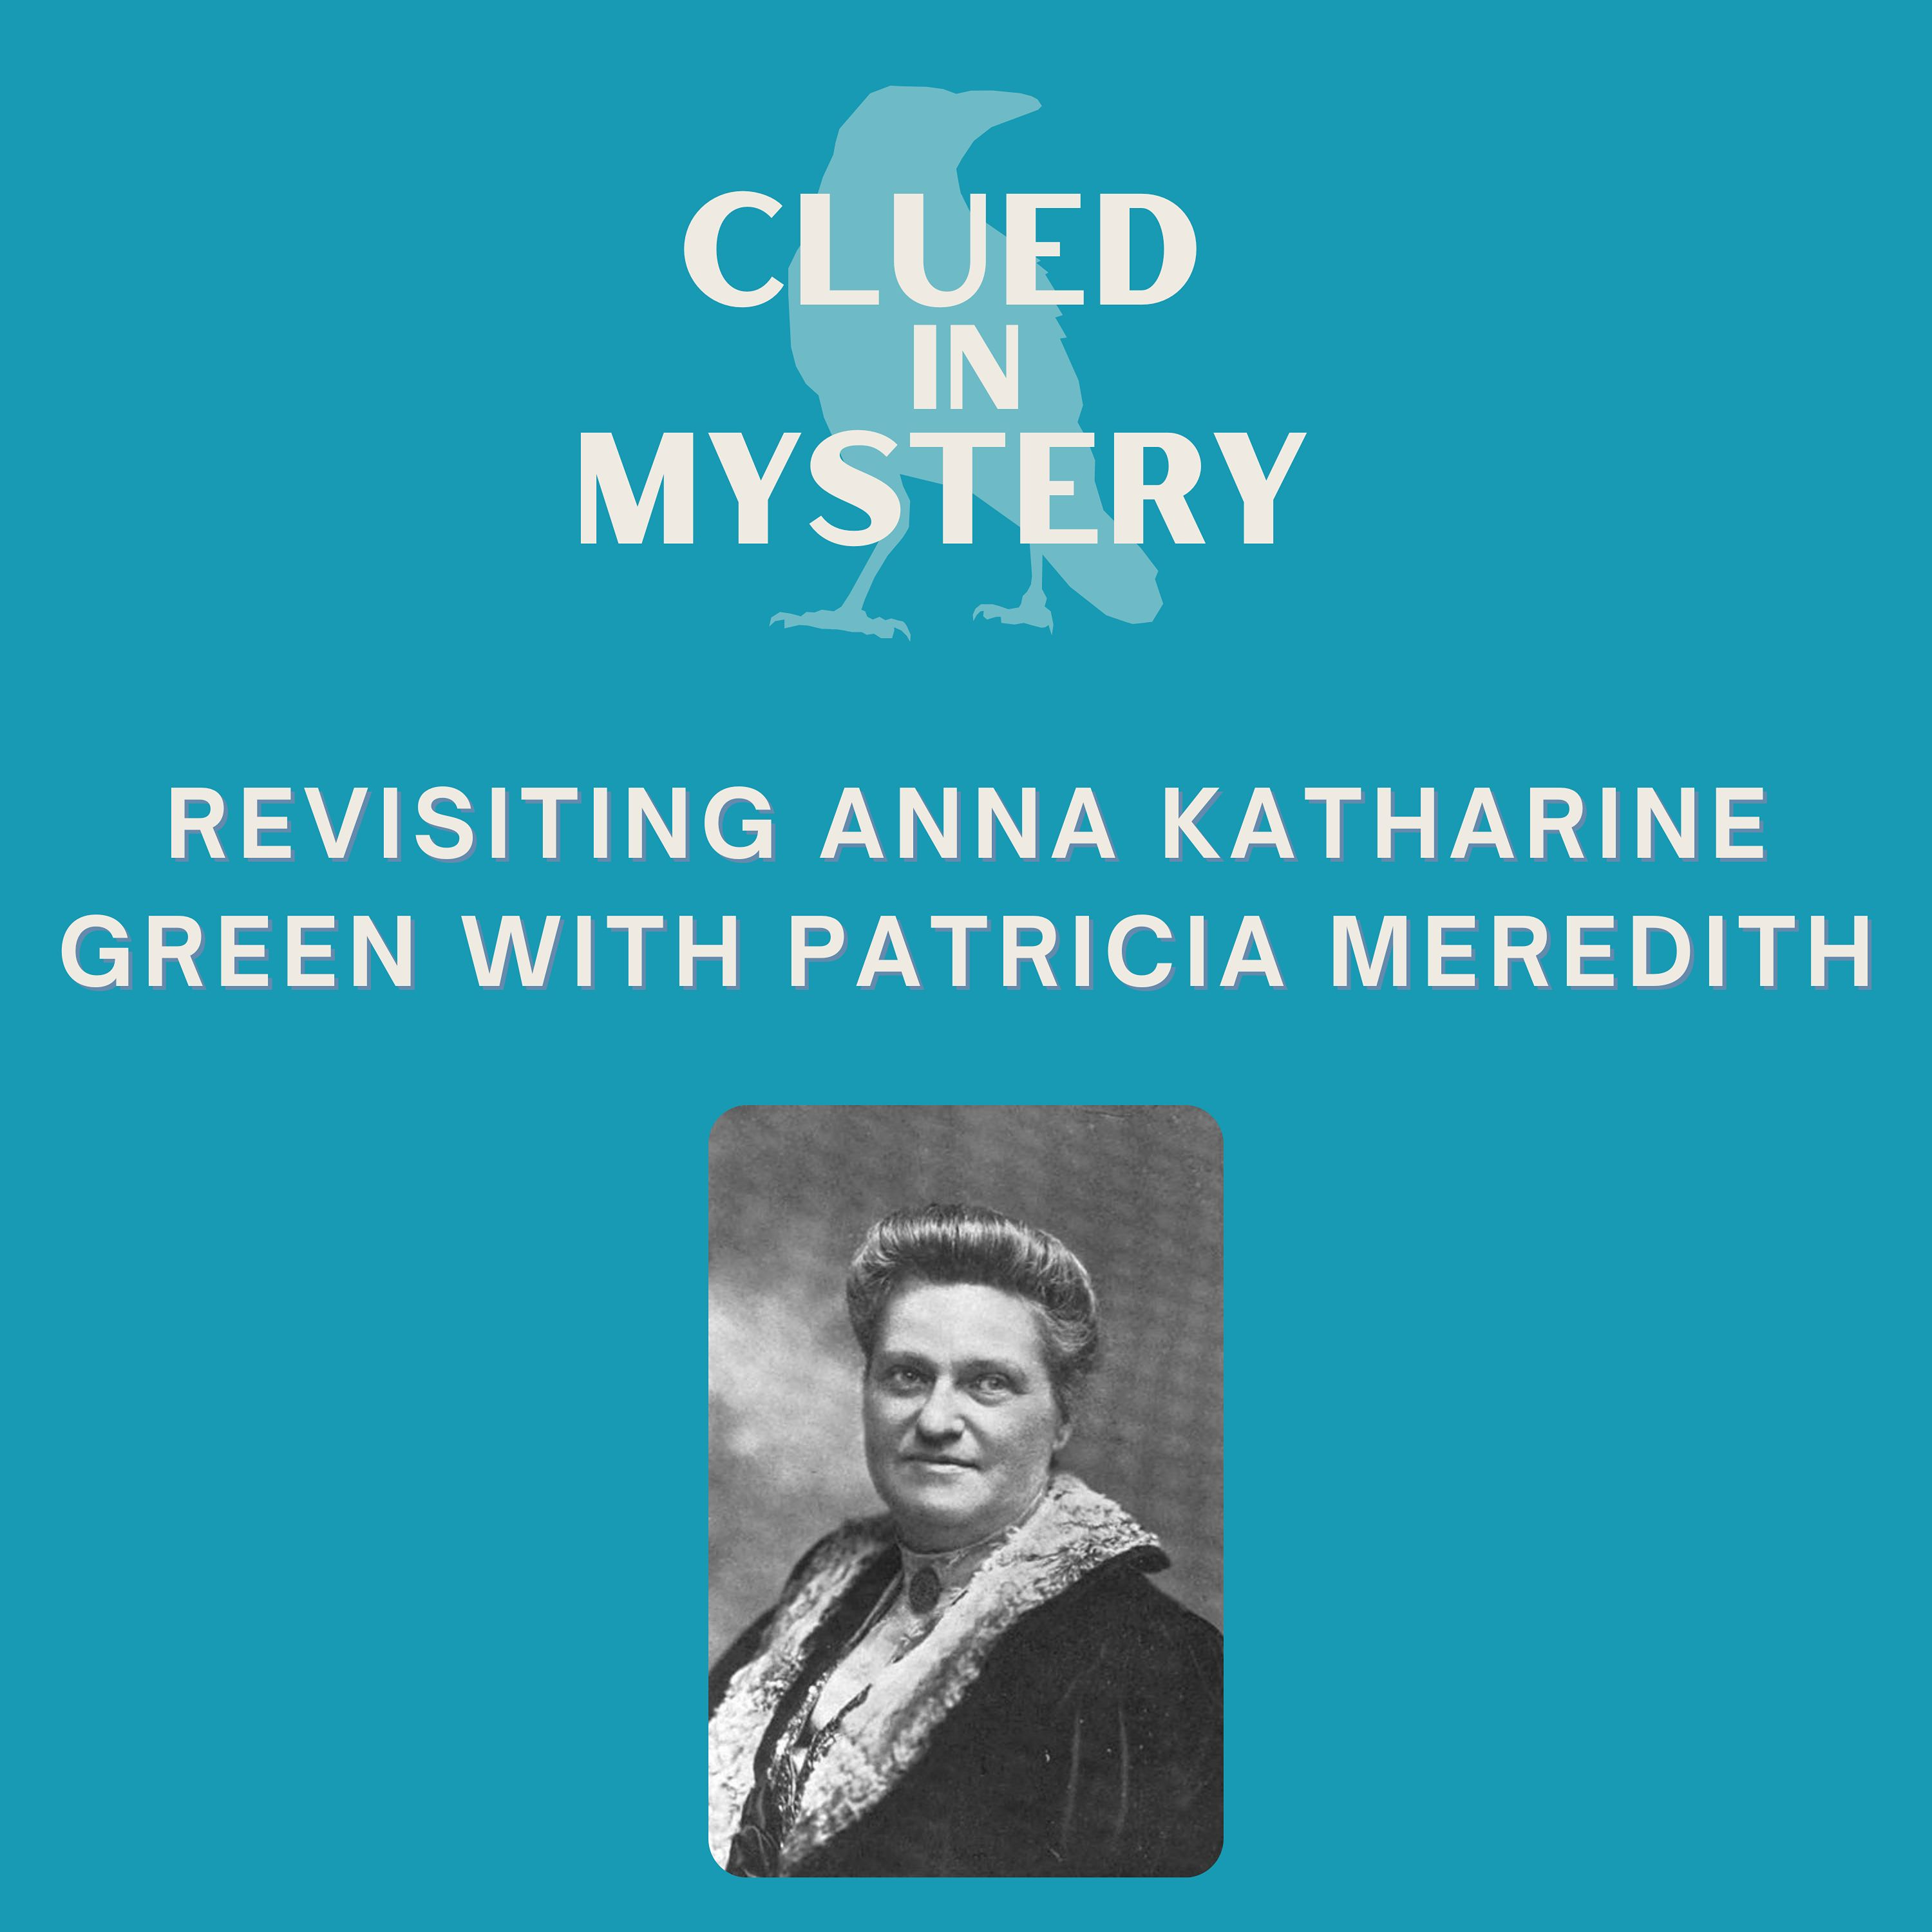 Revisiting Anna Katharine Green with Patricia Meredith